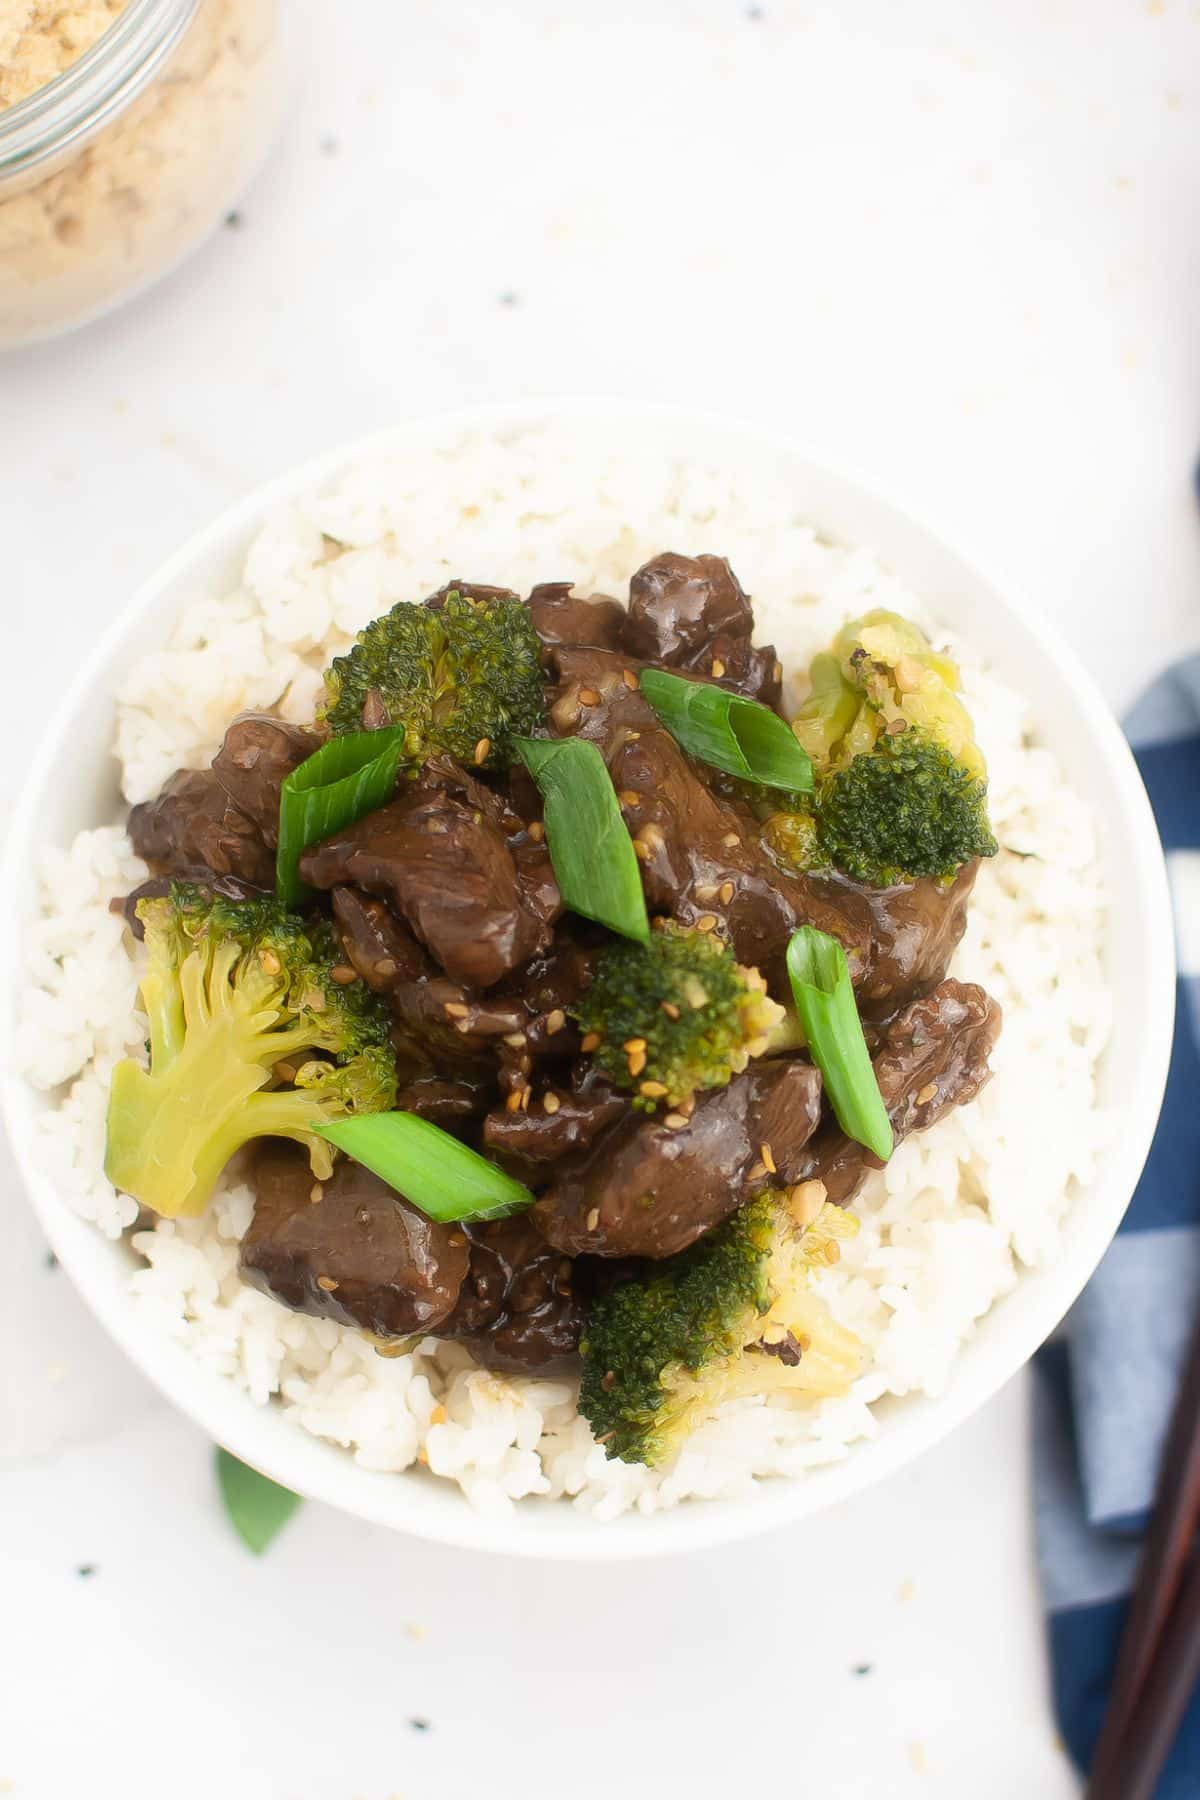 teriyaki beef served on top of a bed of white rice.